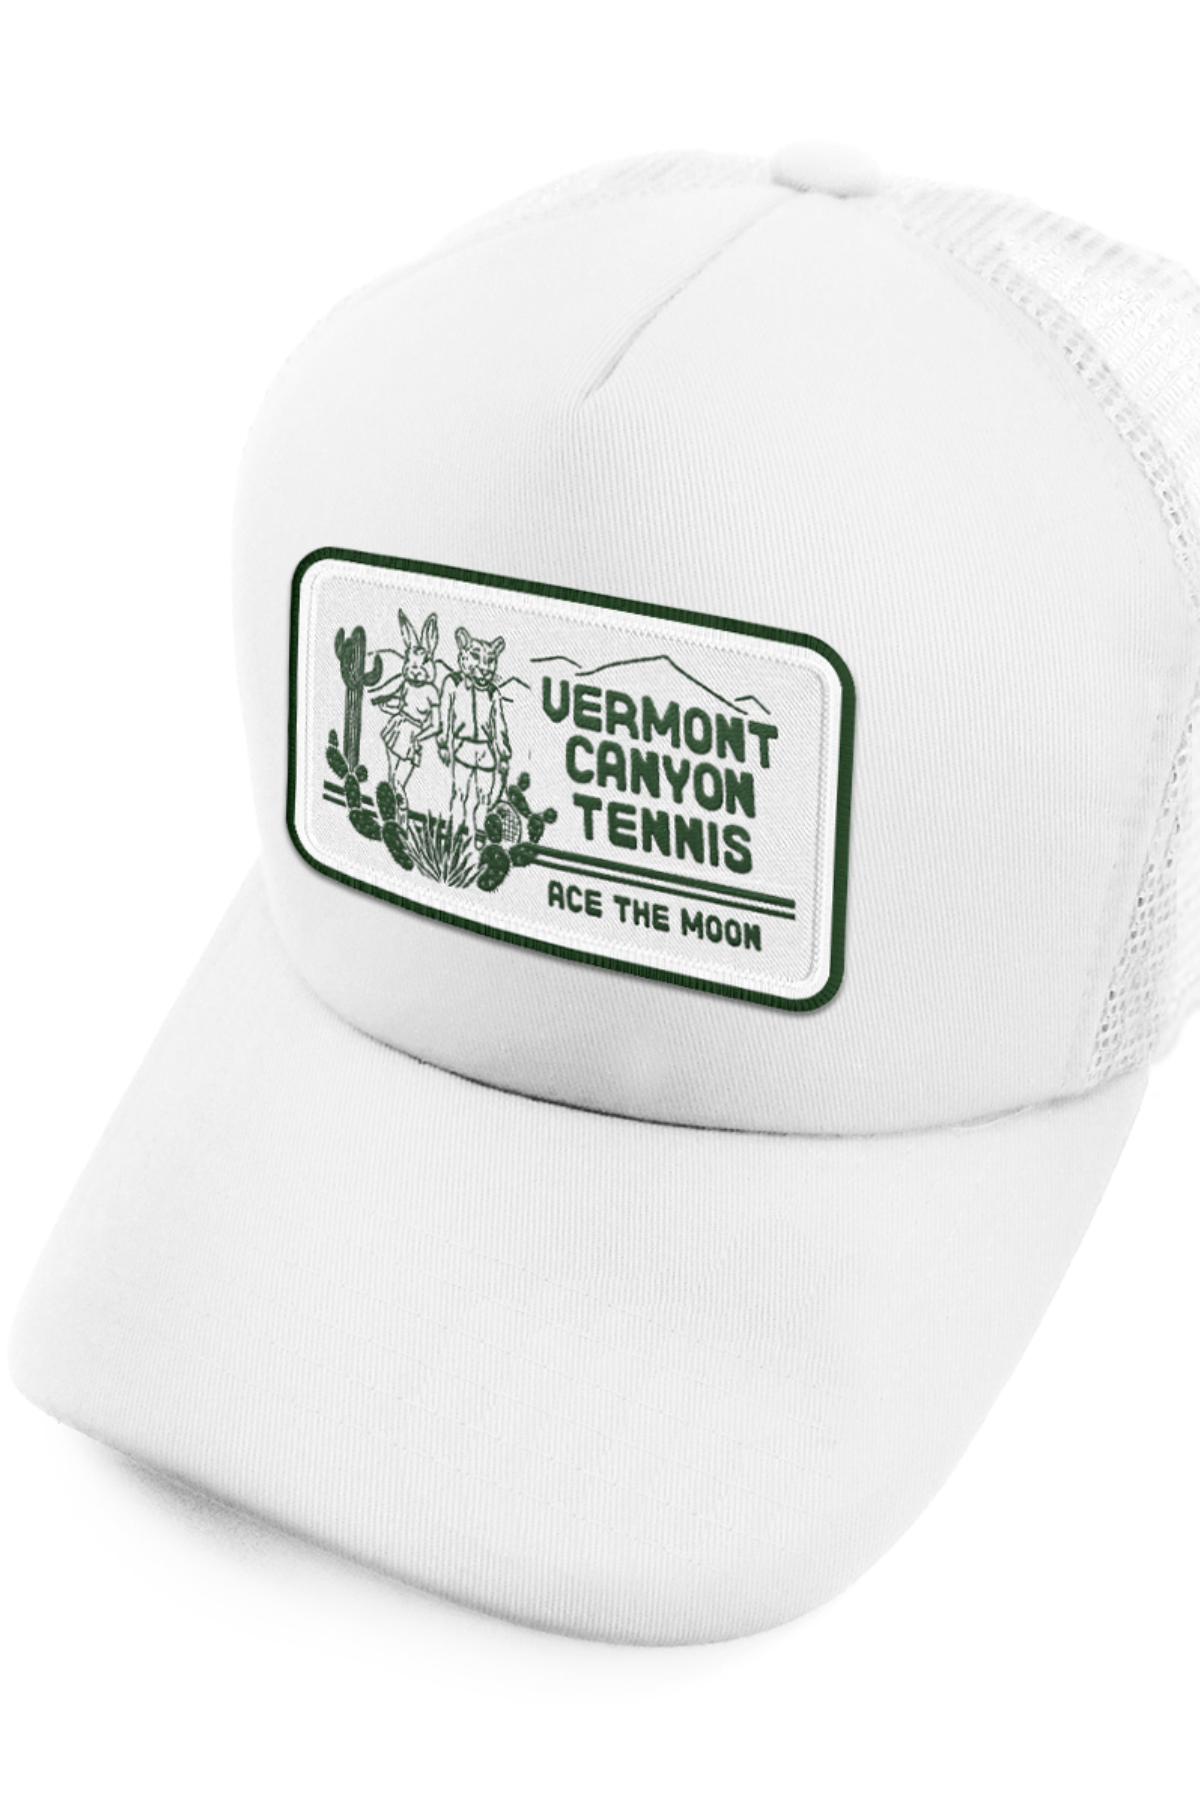 Vermont Canyon Tennis Hat